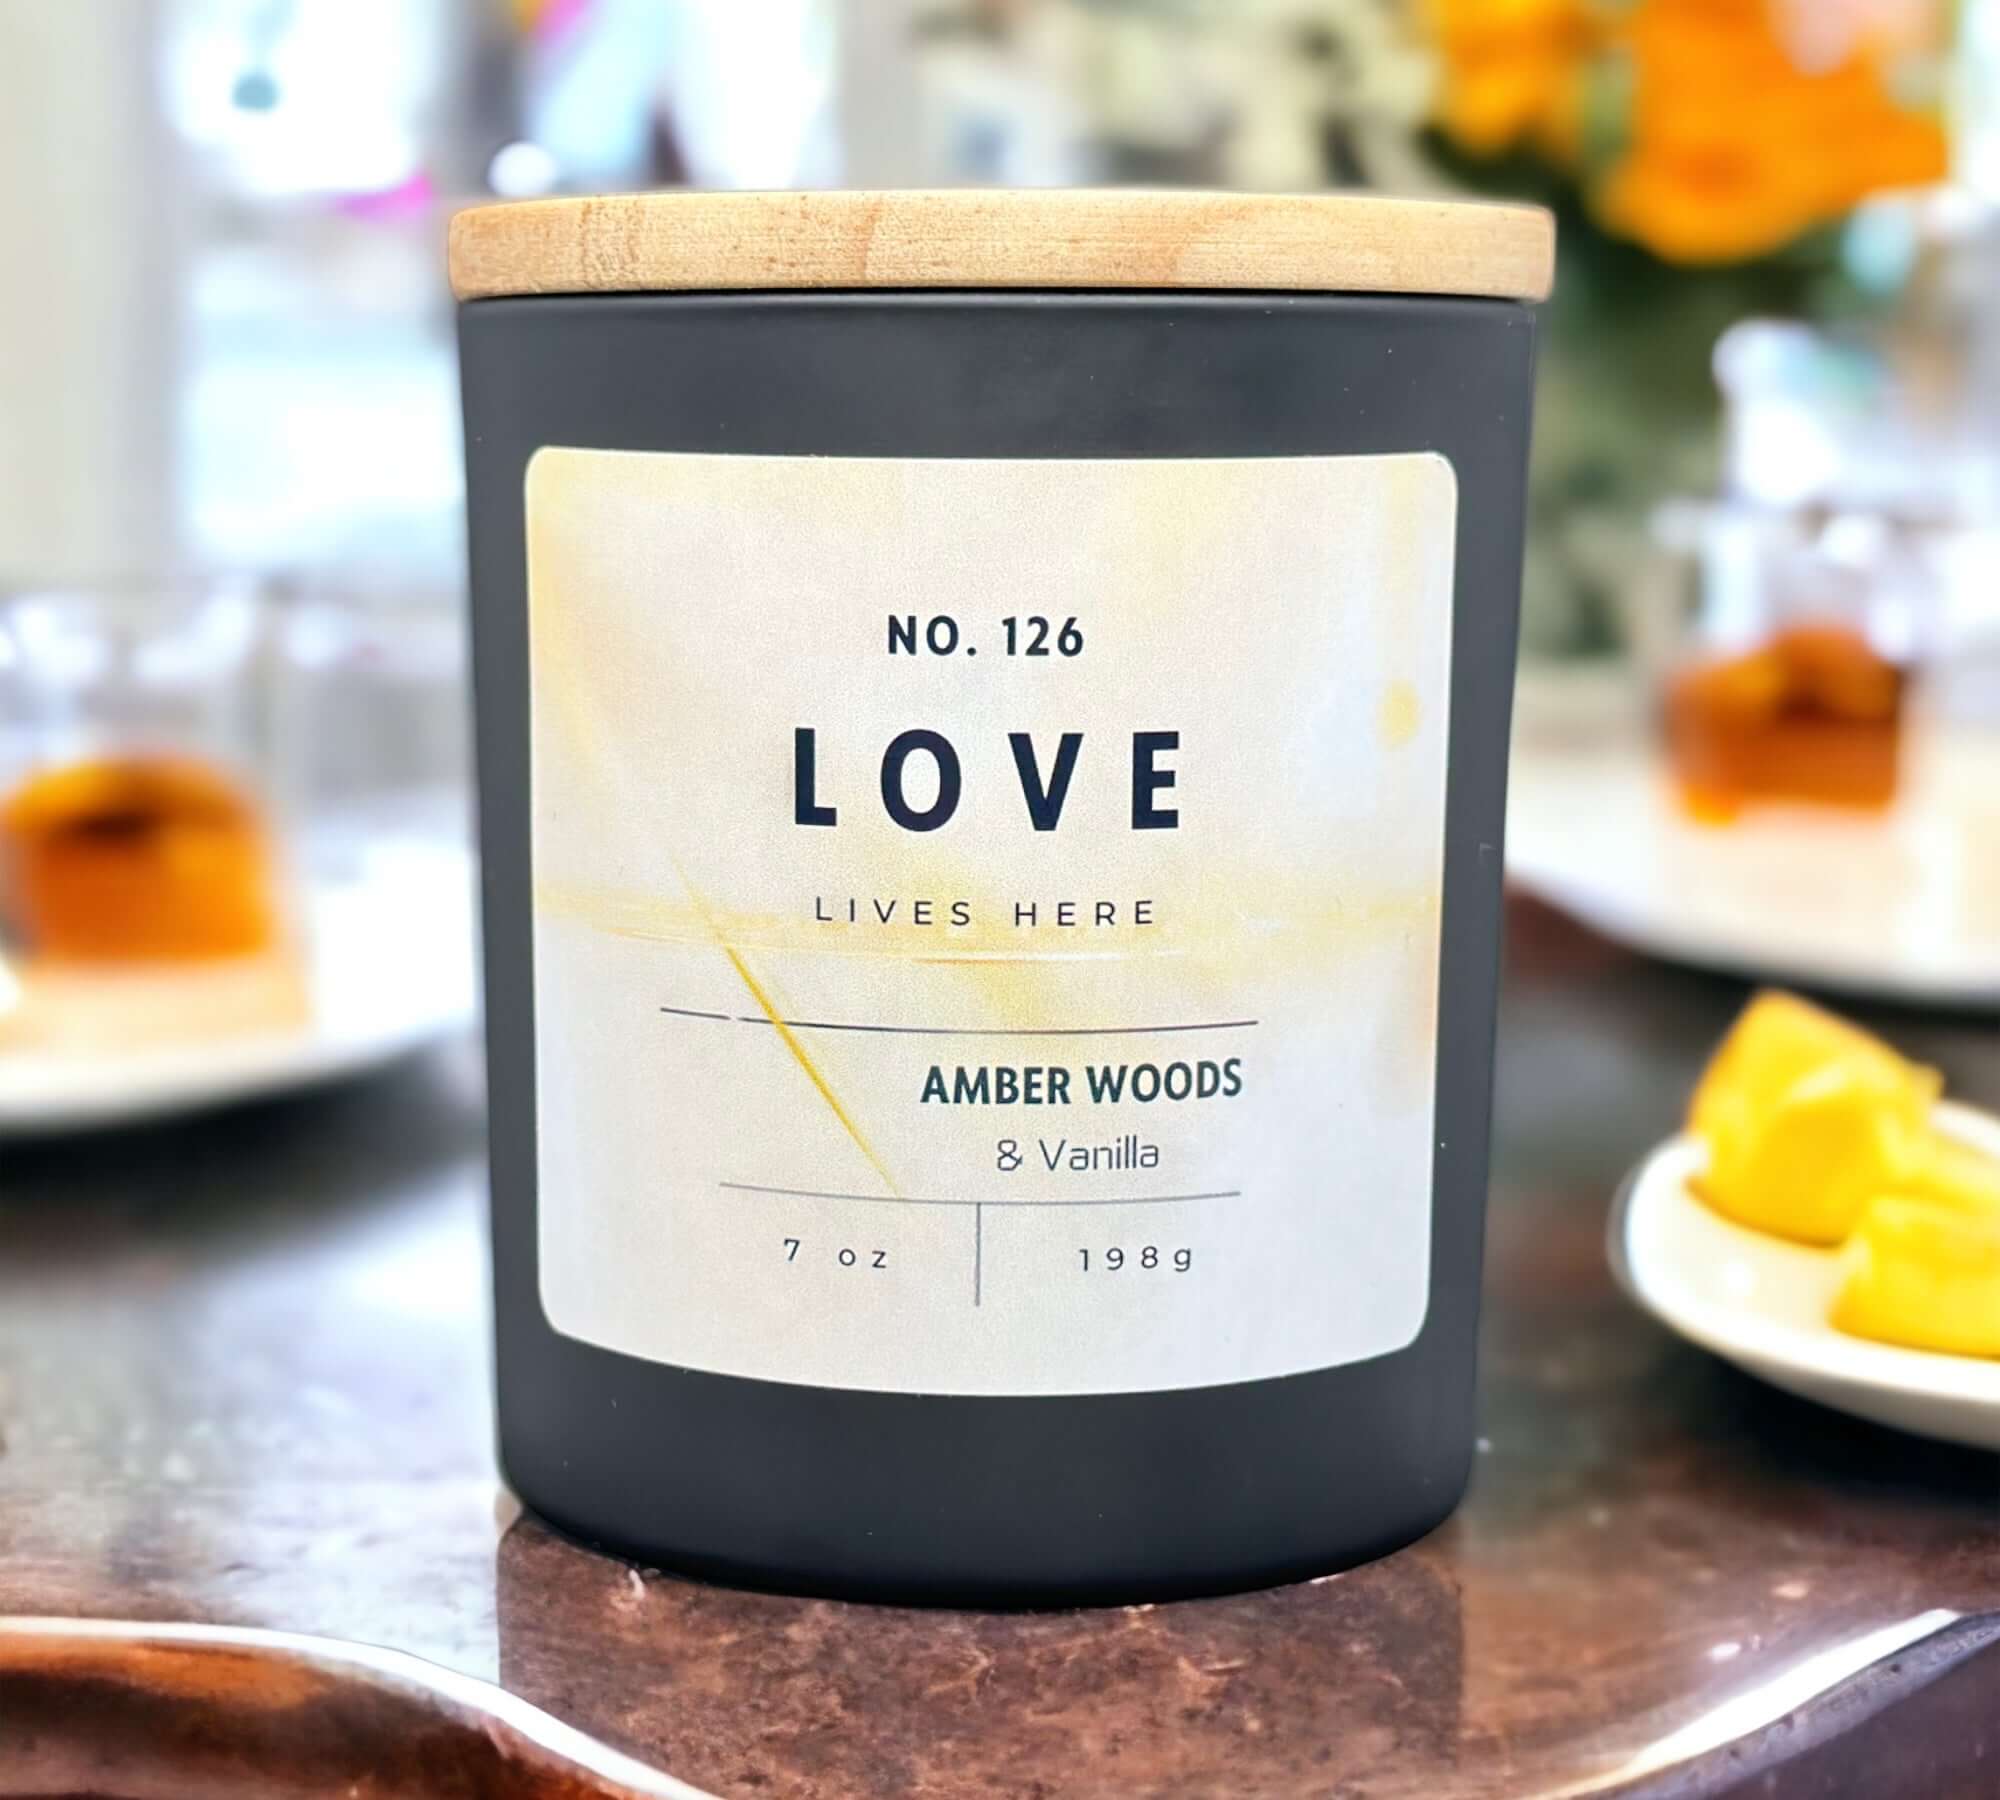 Love lives here candle. Citrus, amber and Vanilla candle